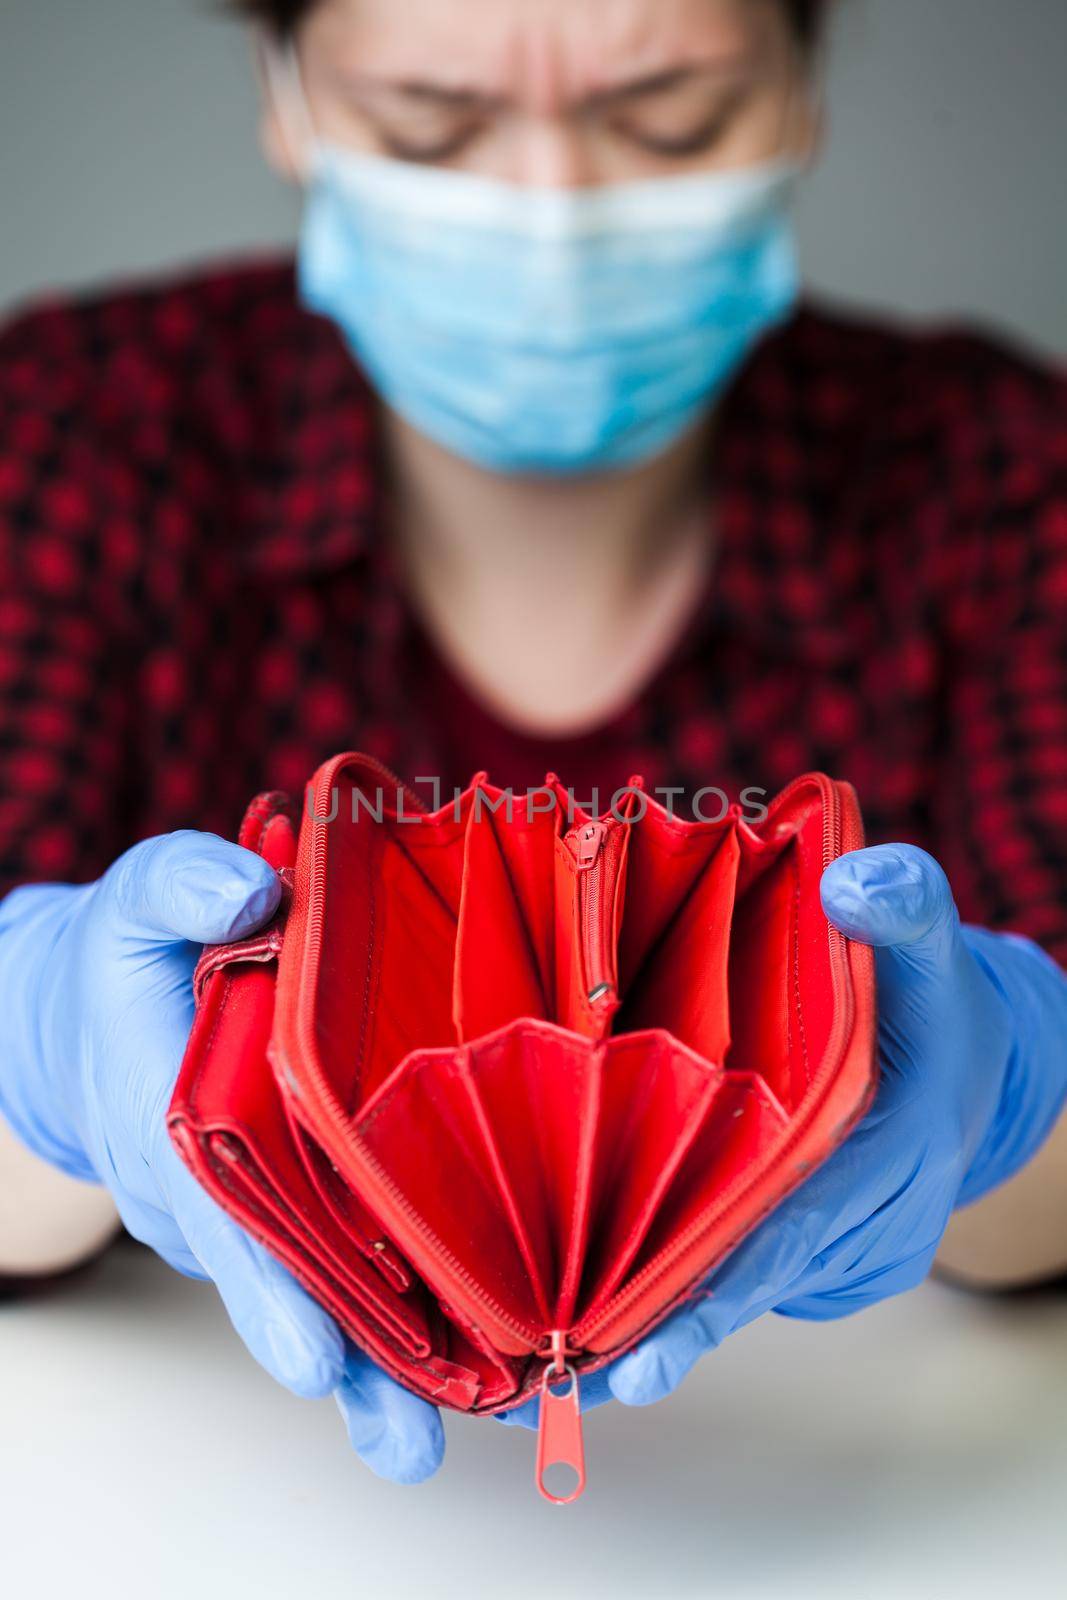 Devastated female caucasian person wearing latex gloves & medical face mask holding empty red wallet by Plyushkin